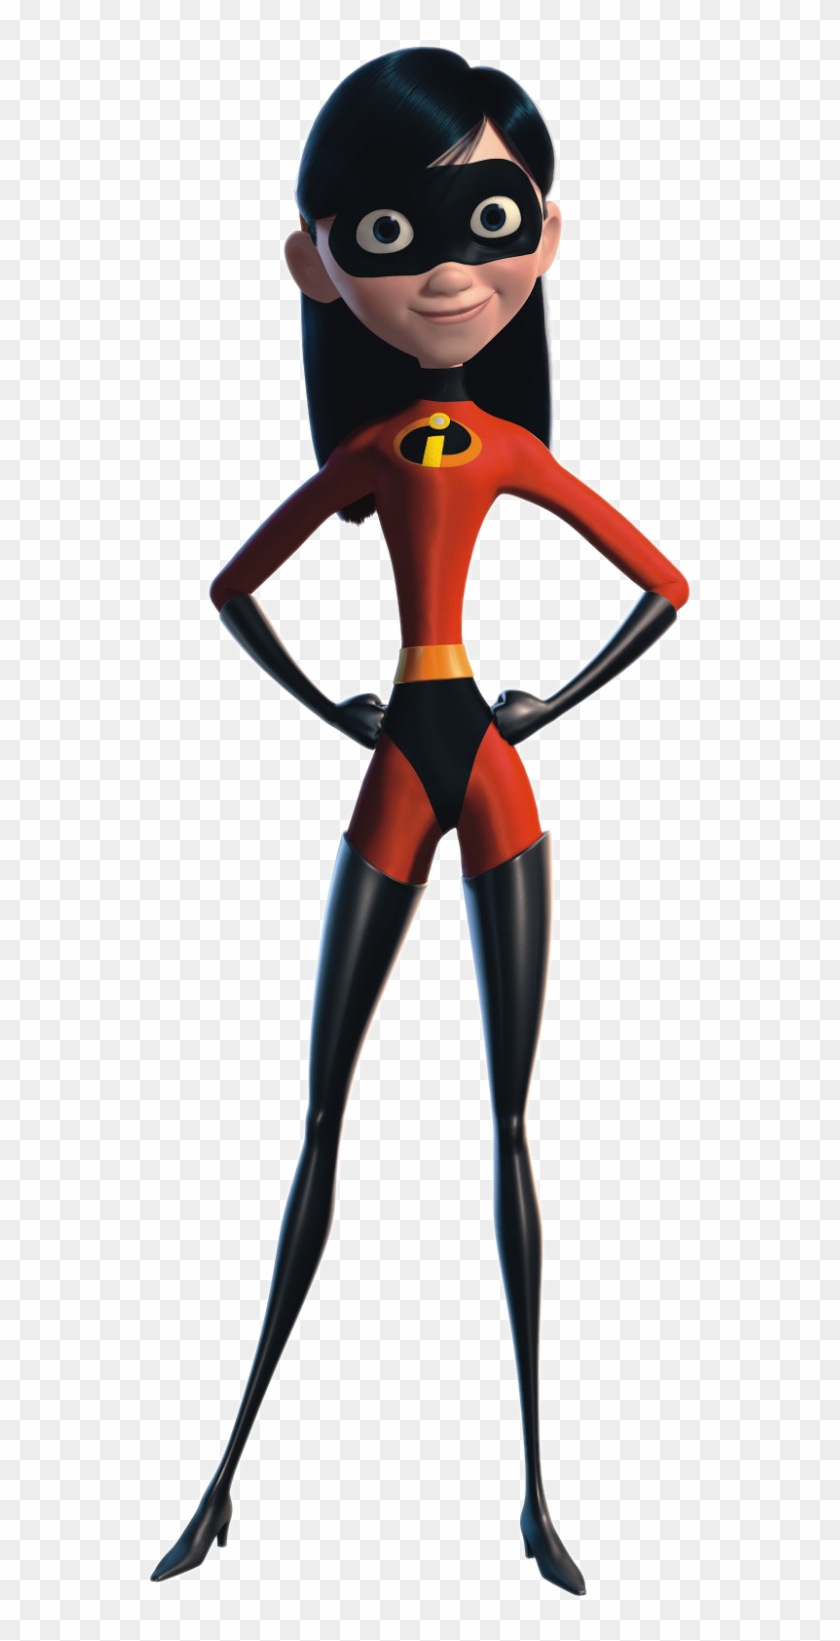 Pixar Movies, Pixar Characters, Disney Movies, Disney - Daughter From The  Incredibles, HD Png Download - 552x1561(#5329445) - PngFind